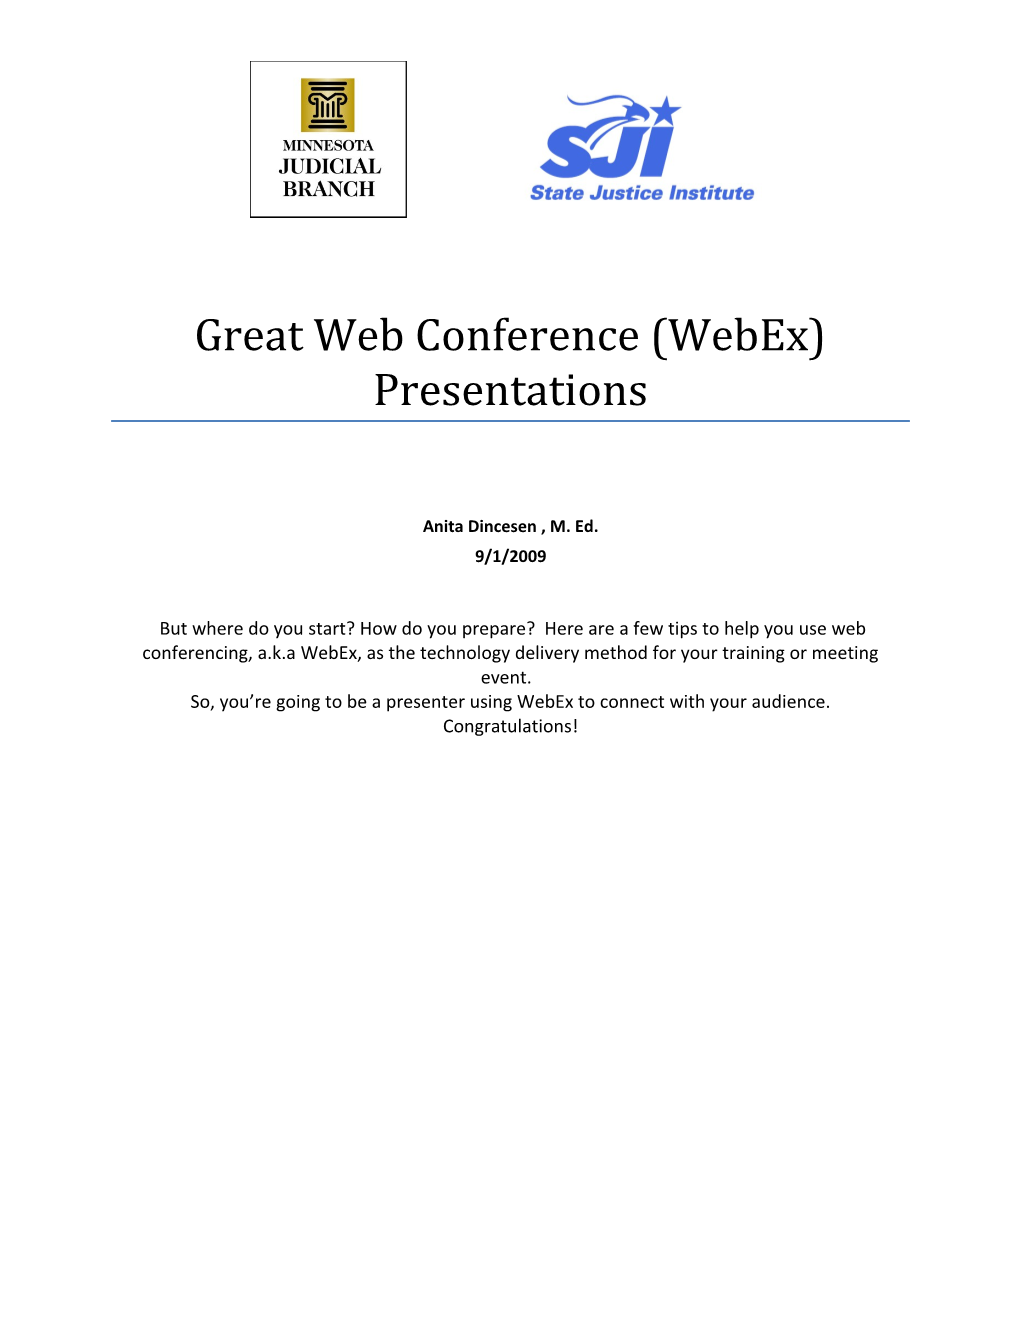 Great Web Conference (Webex) Presentations